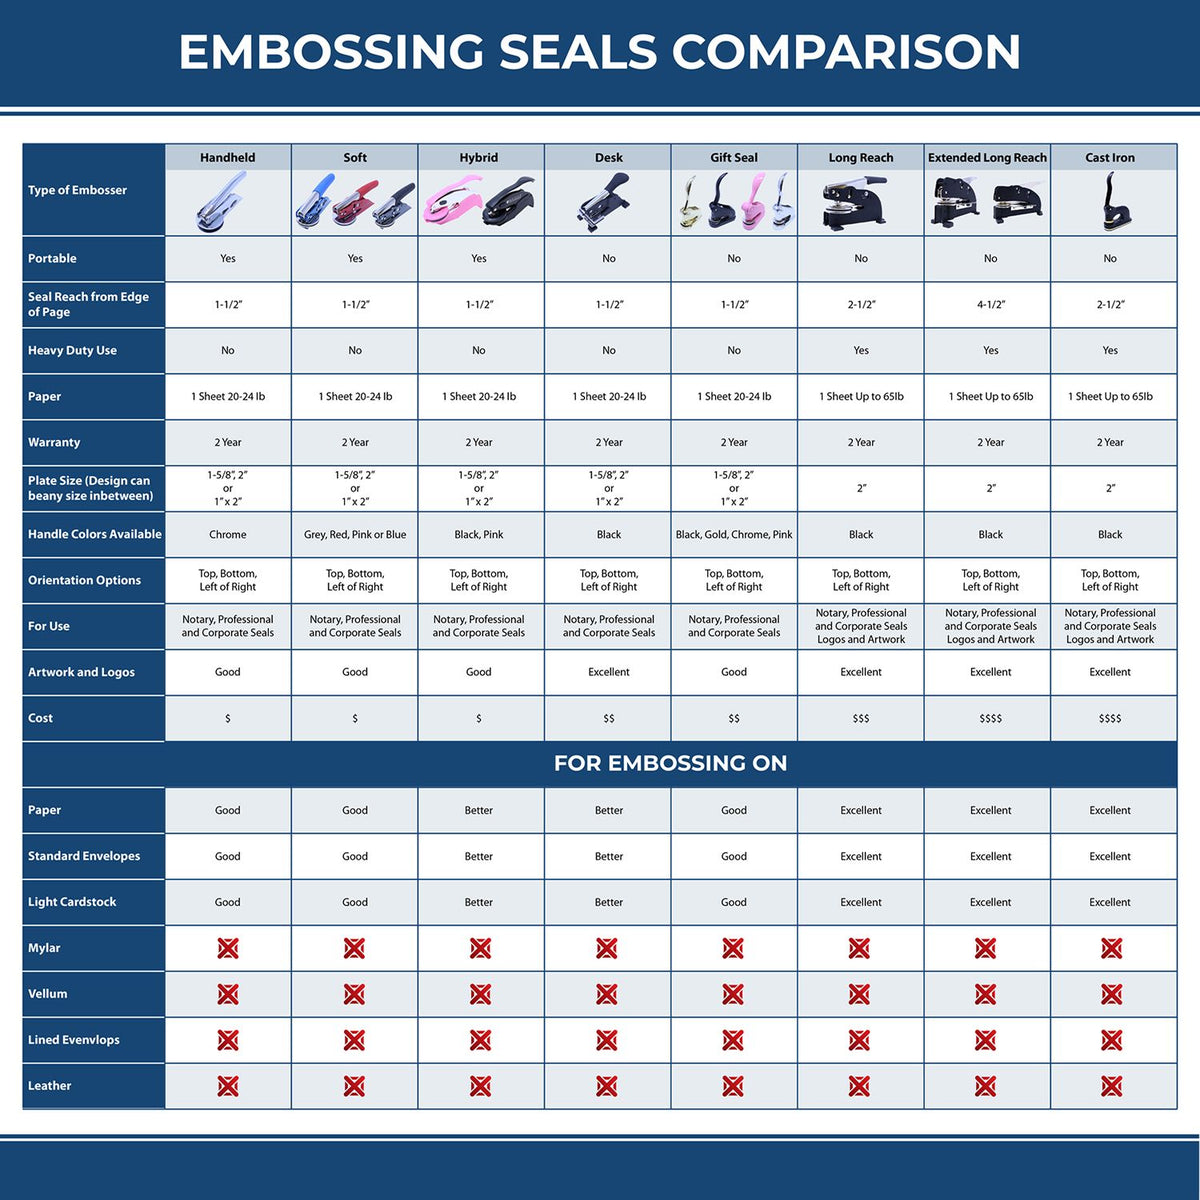 A comparison chart for the different types of mount models available for the Hybrid Minnesota Land Surveyor Seal